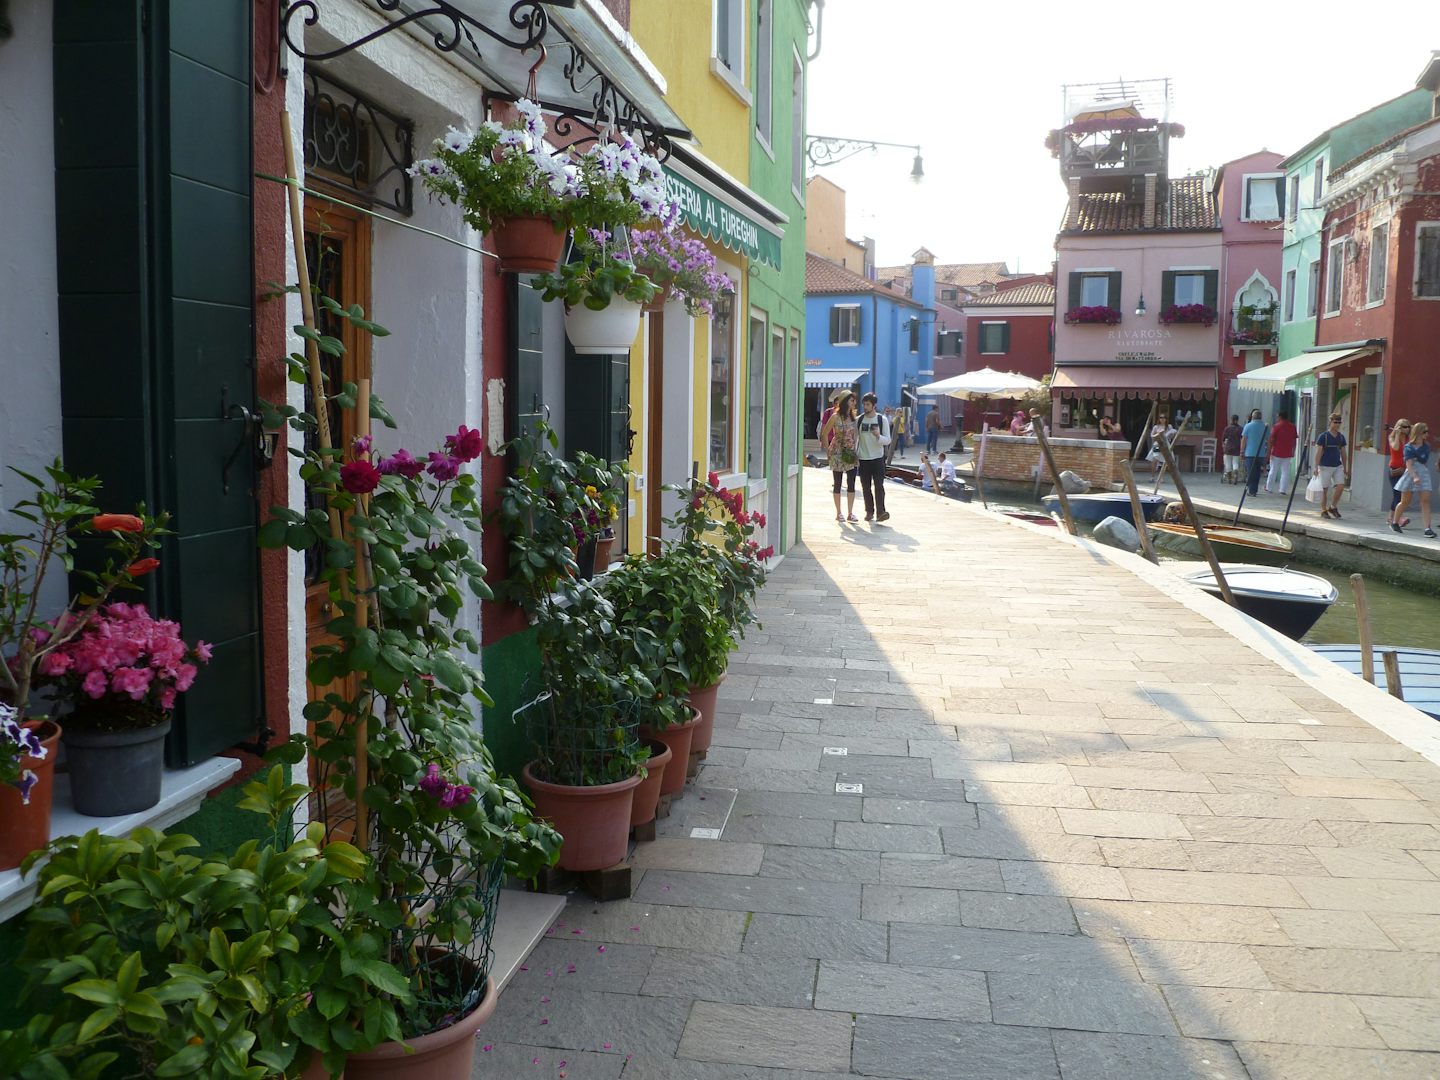 Recommend the Murano, Burano and Torcello Half-Day Tours